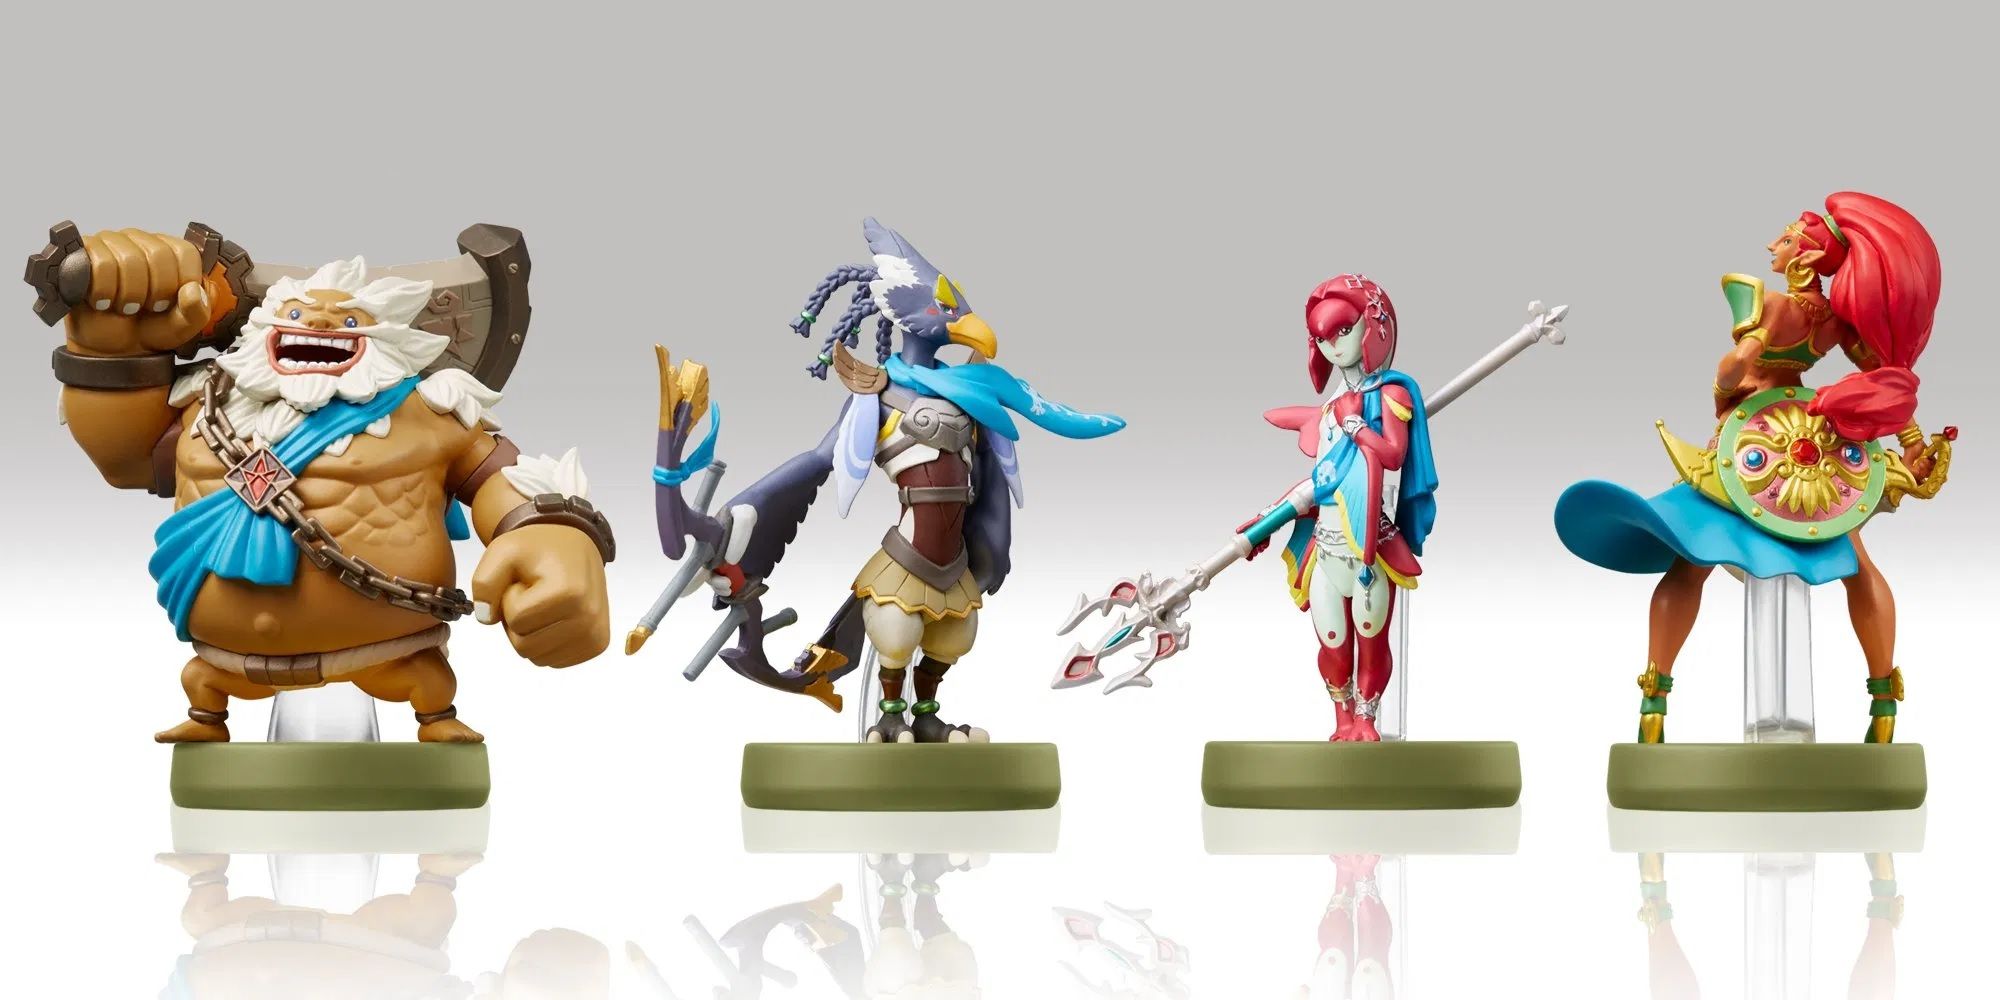 The Champion Amiibo set from The legend of Zelda: Breath of the Wild.